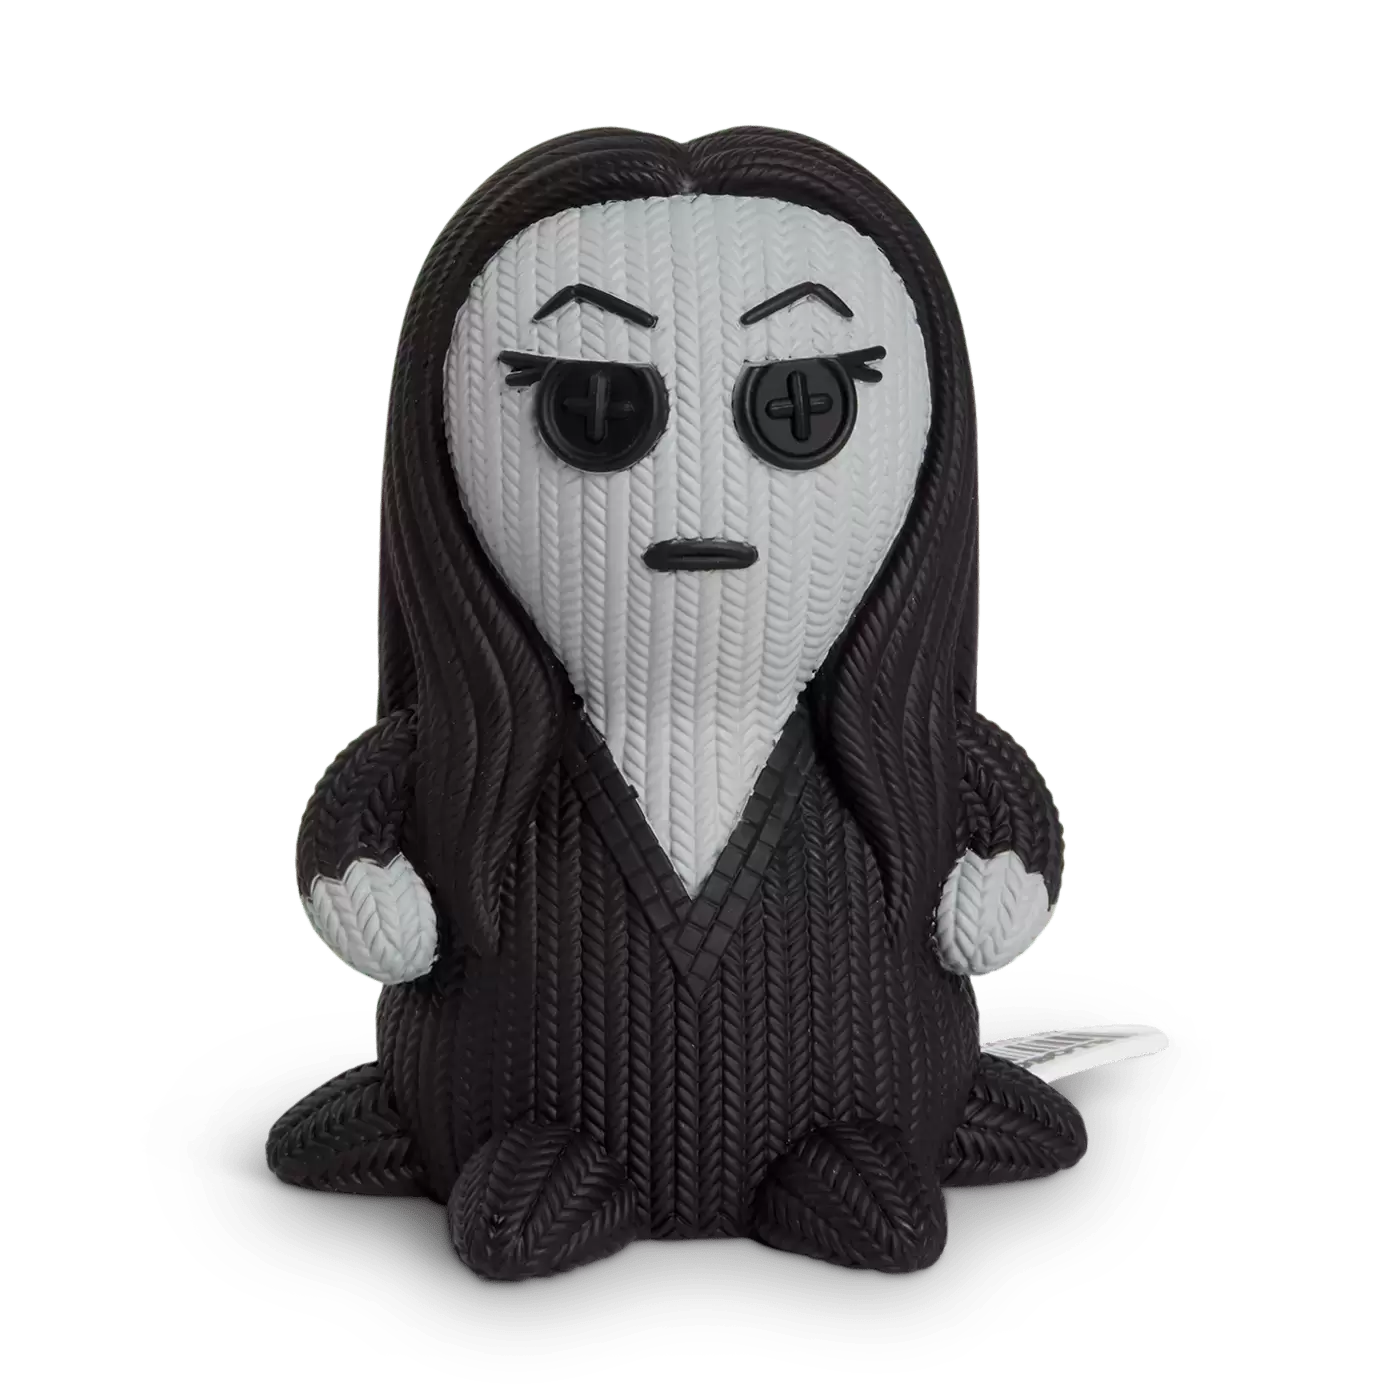 Handmade By Robots - The Addams Family - Morticia